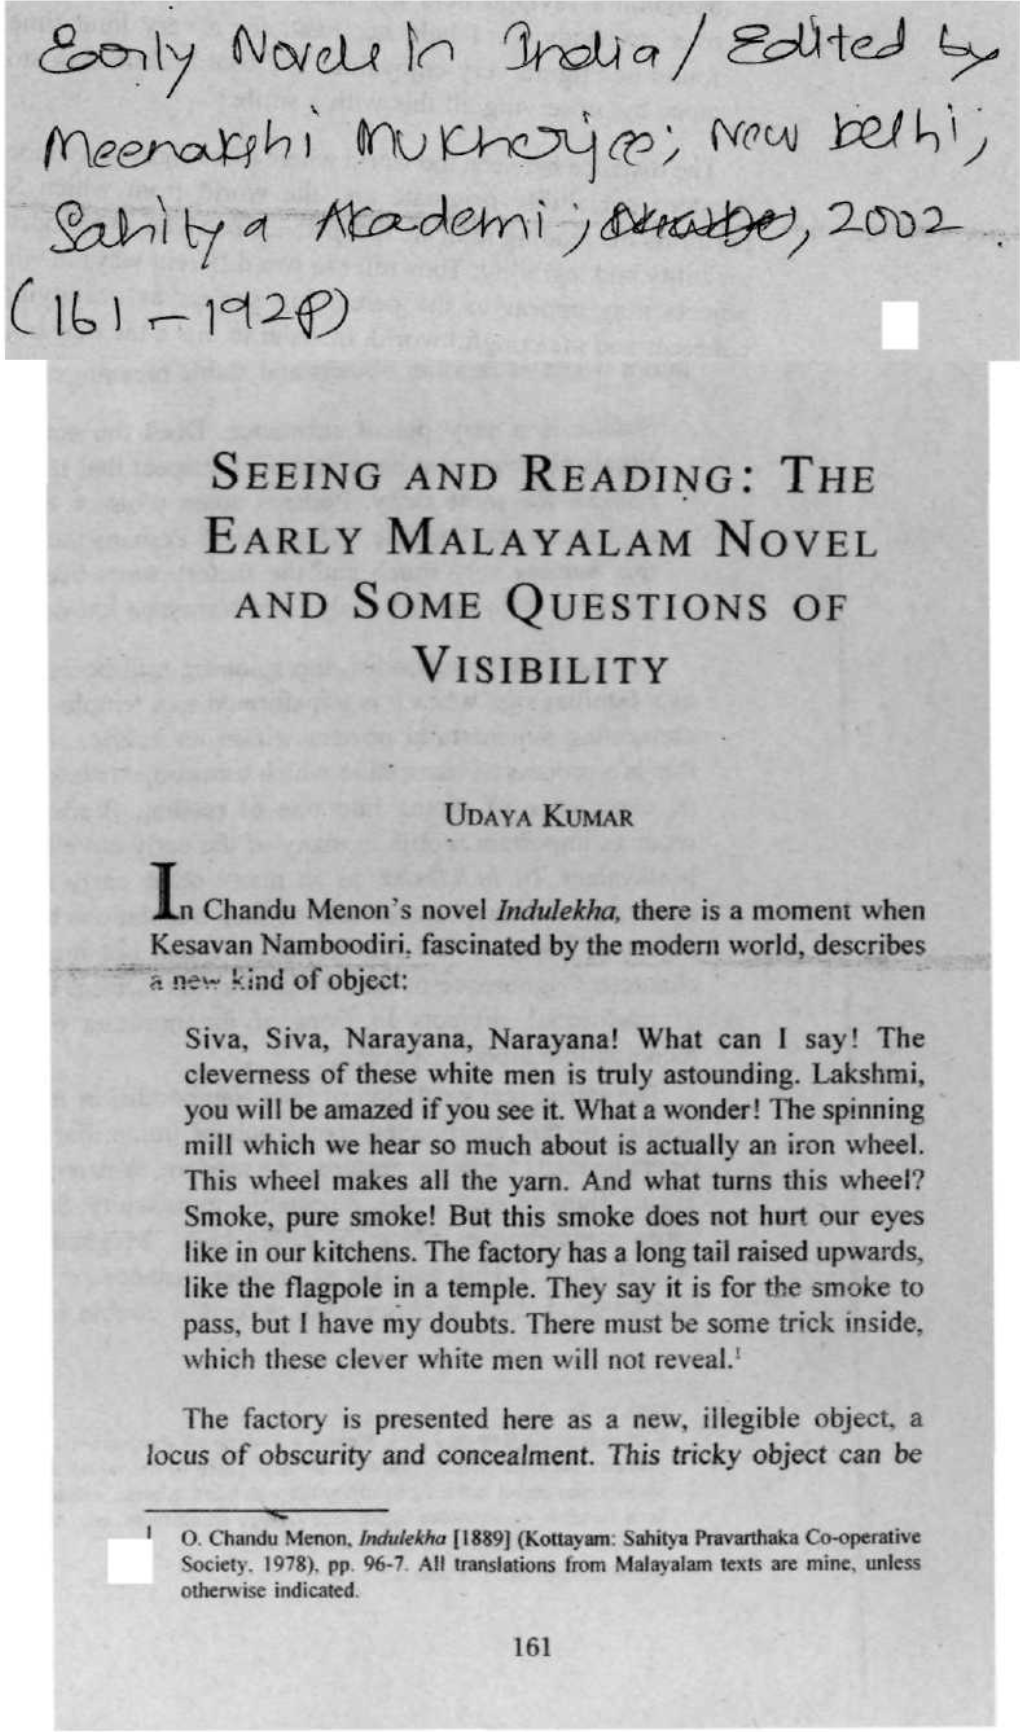 The Early Malayalam Novel and Some Questions of Visibility